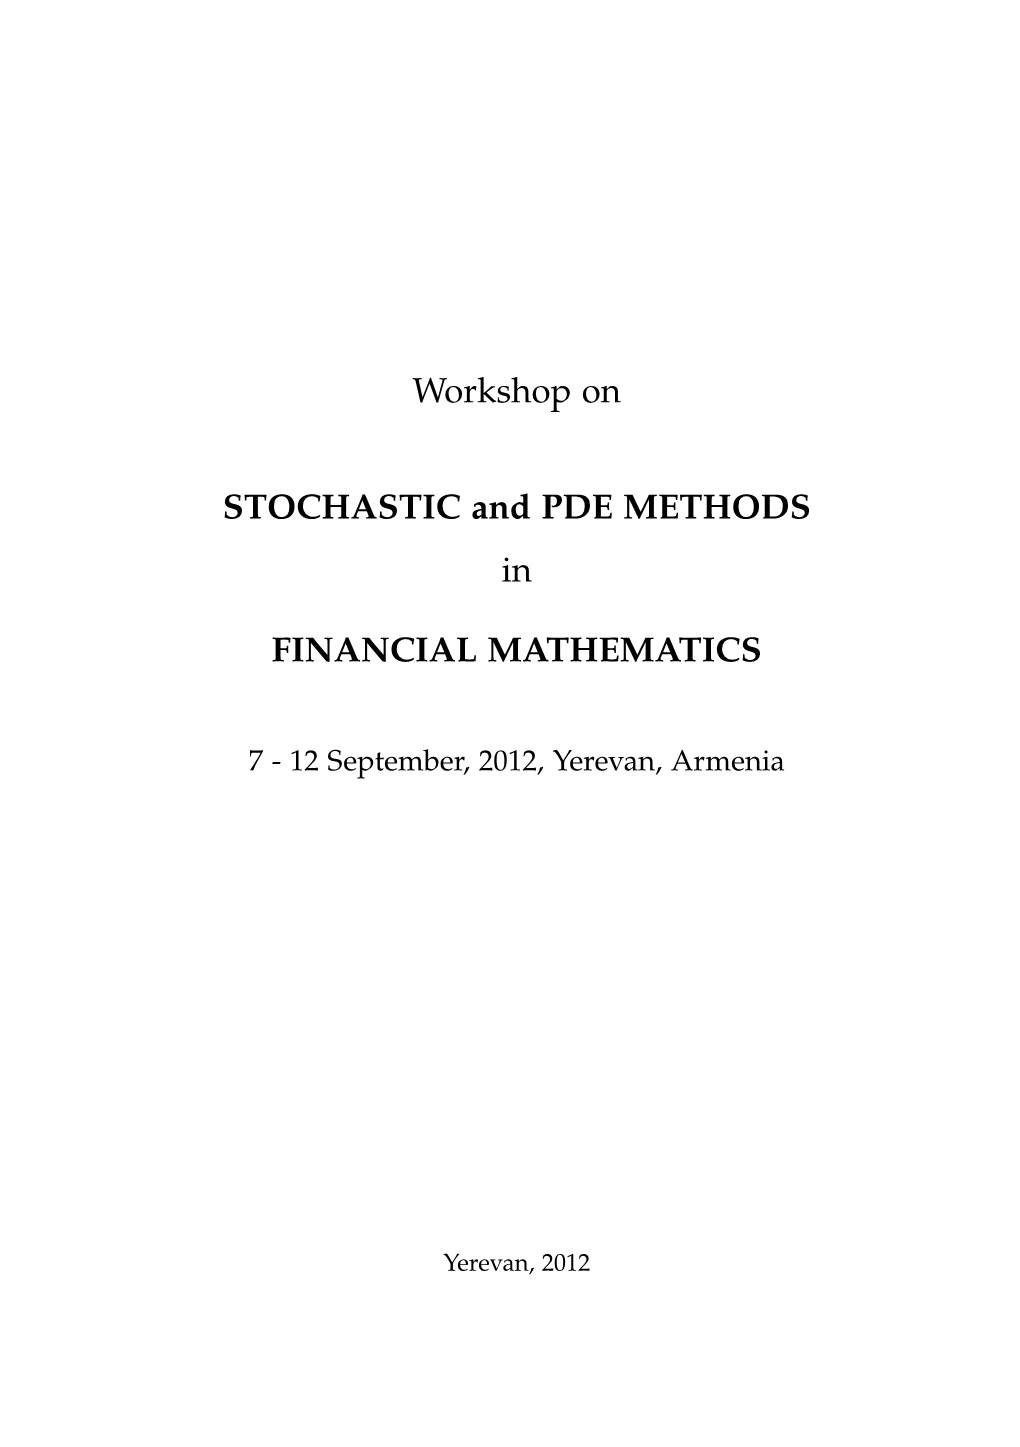 Stochastic and PDE Methods in Financial Mathematics, 2012, Armenia